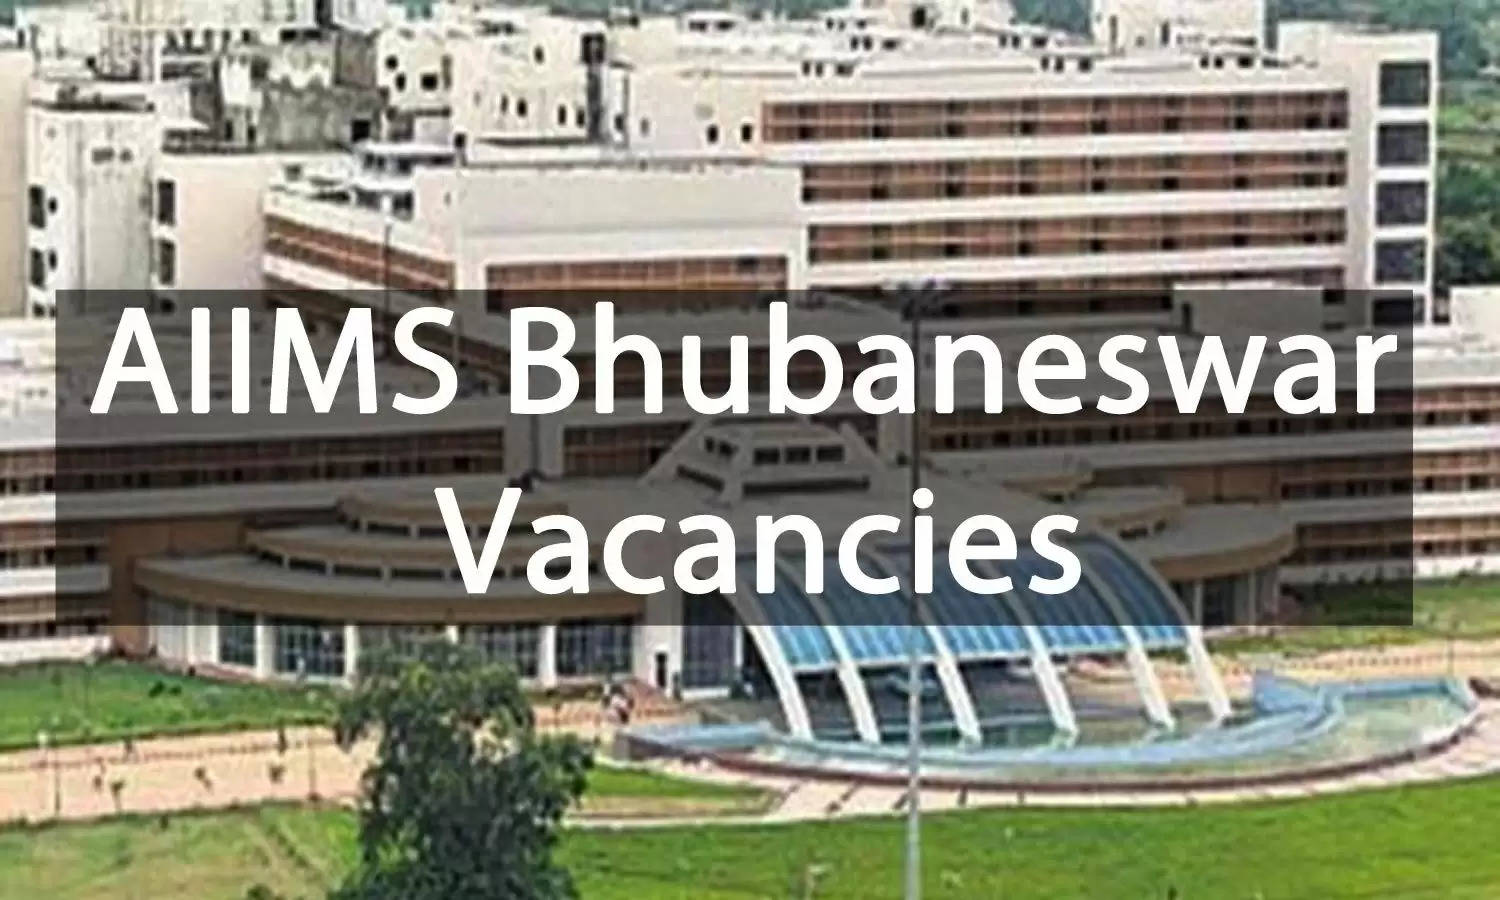 AIIMS Recruitment 2023: A great opportunity has emerged to get a job (Sarkari Naukri) in All India Institute of Medical Sciences, Bhubaneswar (AIIMS). AIIMS has sought applications to fill the posts of Research Assistant (AIIMS Recruitment 2023). Interested and eligible candidates who want to apply for these vacant posts (AIIMS Recruitment 2023), can apply by visiting the official website of AIIMS at aiims.edu. The last date to apply for these posts (AIIMS Recruitment 2023) is 27 January 2023.  Apart from this, candidates can also apply for these posts (AIIMS Recruitment 2023) directly by clicking on this official link aiims.edu. If you want more detailed information related to this recruitment, then you can see and download the official notification (AIIMS Recruitment 2023) through this link AIIMS Recruitment 2023 Notification PDF. A total of 1 post will be filled under this recruitment (AIIMS Recruitment 2023) process.  Important Dates for AIIMS Recruitment 2023  Online Application Starting Date –  Last date for online application - 27 January 2023  Details of posts for AIIMS Recruitment 2023  Total No. of Posts- : 1 Post  Eligibility Criteria for AIIMS Recruitment 2023  Research Assistant: Post Graduate degree in Social Science from a recognized Institute with experience  Age Limit for AIIMS Recruitment 2023  Research Assistant - The age limit of the candidates will be valid as per the rules of the department.  Salary for AIIMS Recruitment 2023  Research Assistant - 32000/-  Selection Process for AIIMS Recruitment 2023  Research Assistant - Will be done on the basis of interview.  How to apply for AIIMS Recruitment 2023  Interested and eligible candidates can apply through the official website of AIIMS (aiims.edu) by 27 January 2023. For detailed information in this regard, refer to the official notification given above.  If you want to get a government job, then apply for this recruitment before the last date and fulfill your dream of getting a government job. You can visit naukrinama.com for more such latest government jobs information.